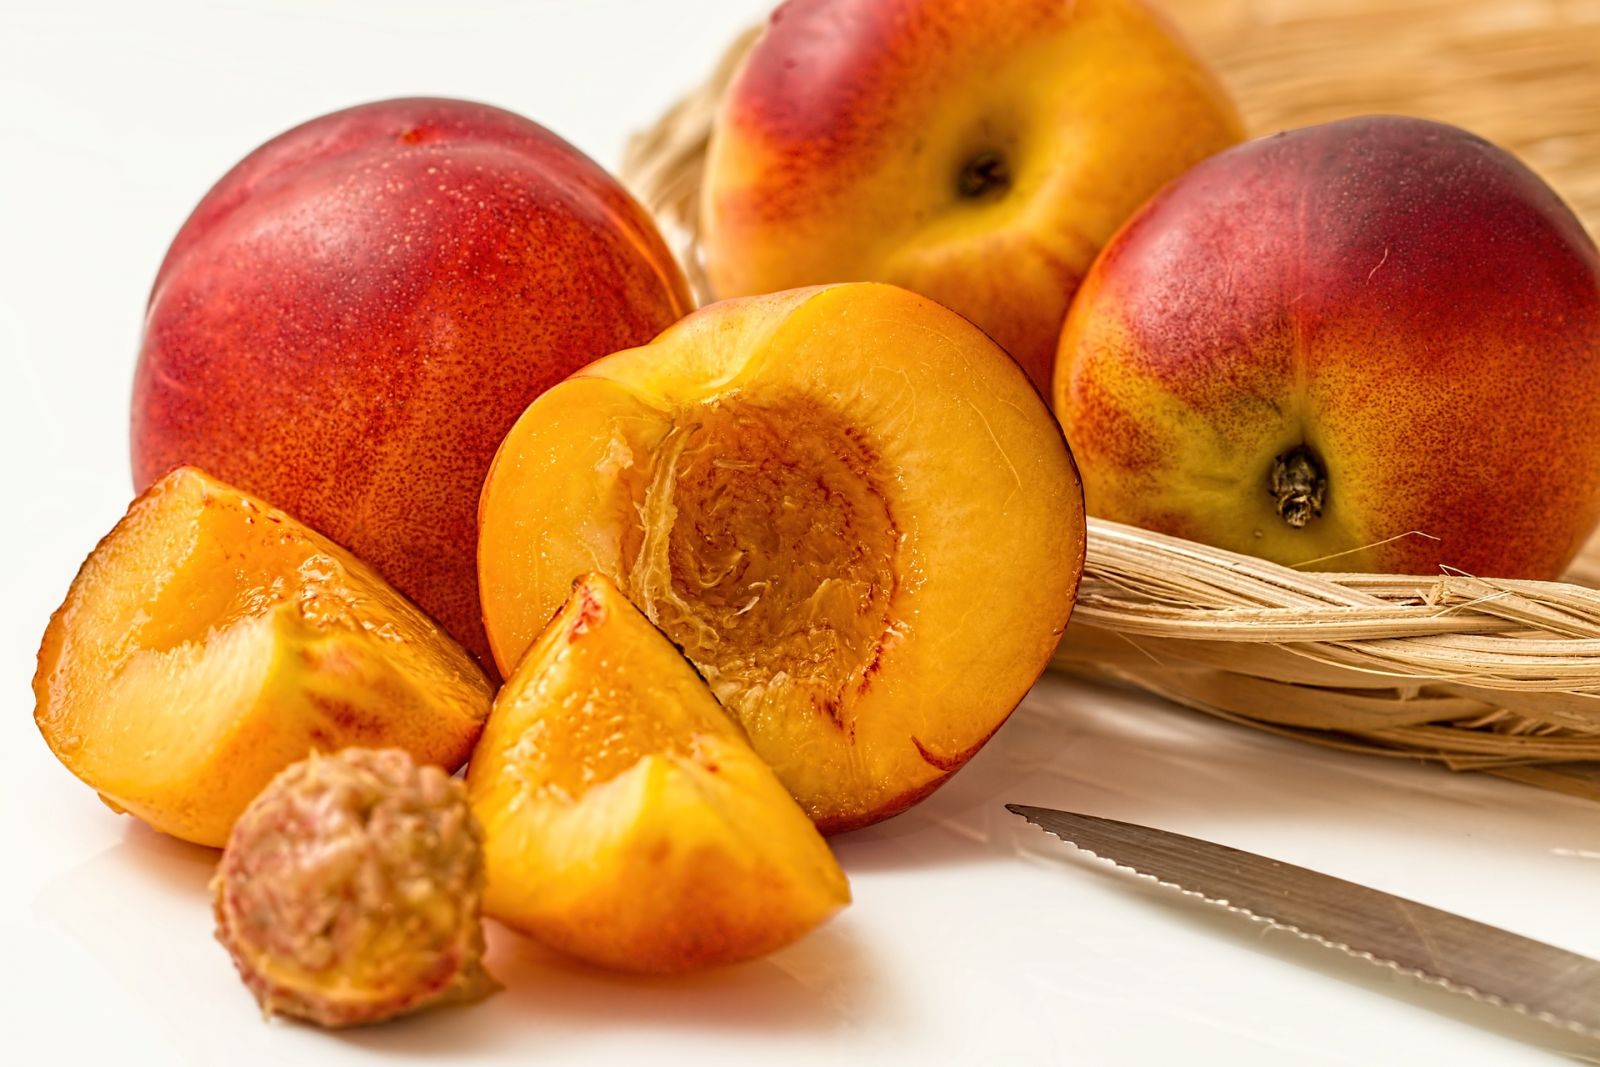 Grilled peaches and nectarines - Image by Steve Buissinne from Pixabay